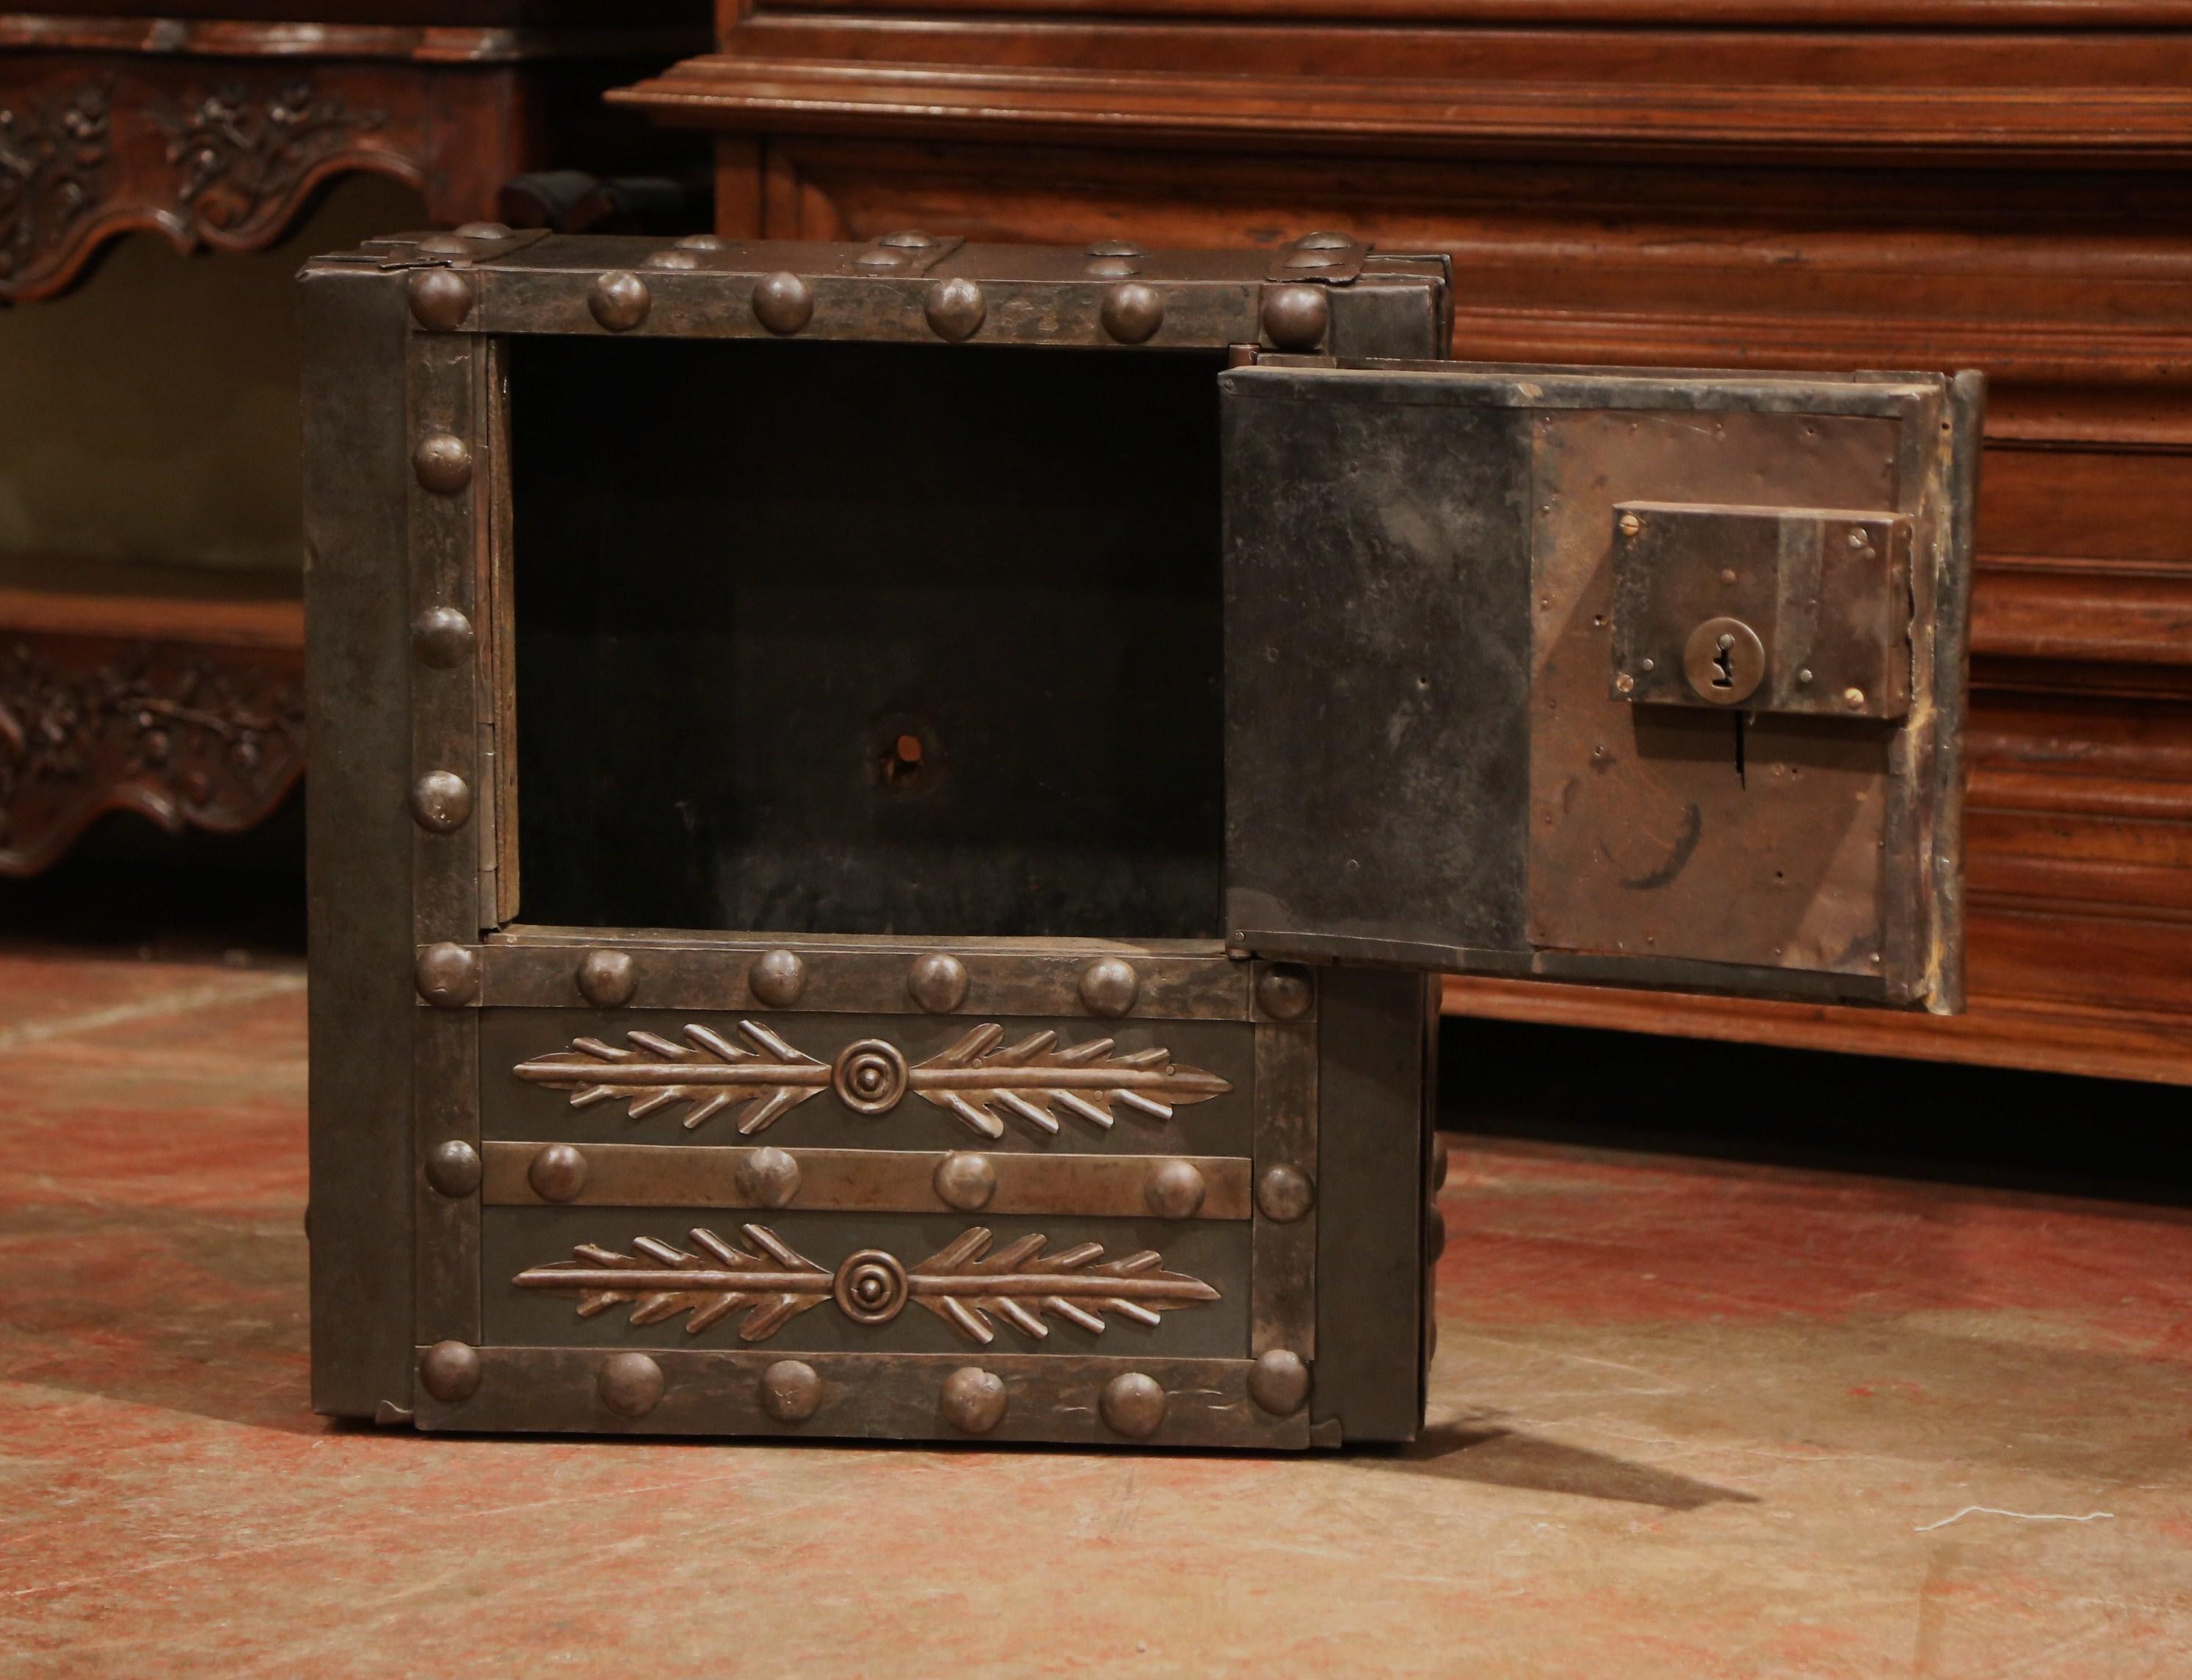 Polished Mid-19th Century French Forged Wrought Iron Hobnail Studded Safe